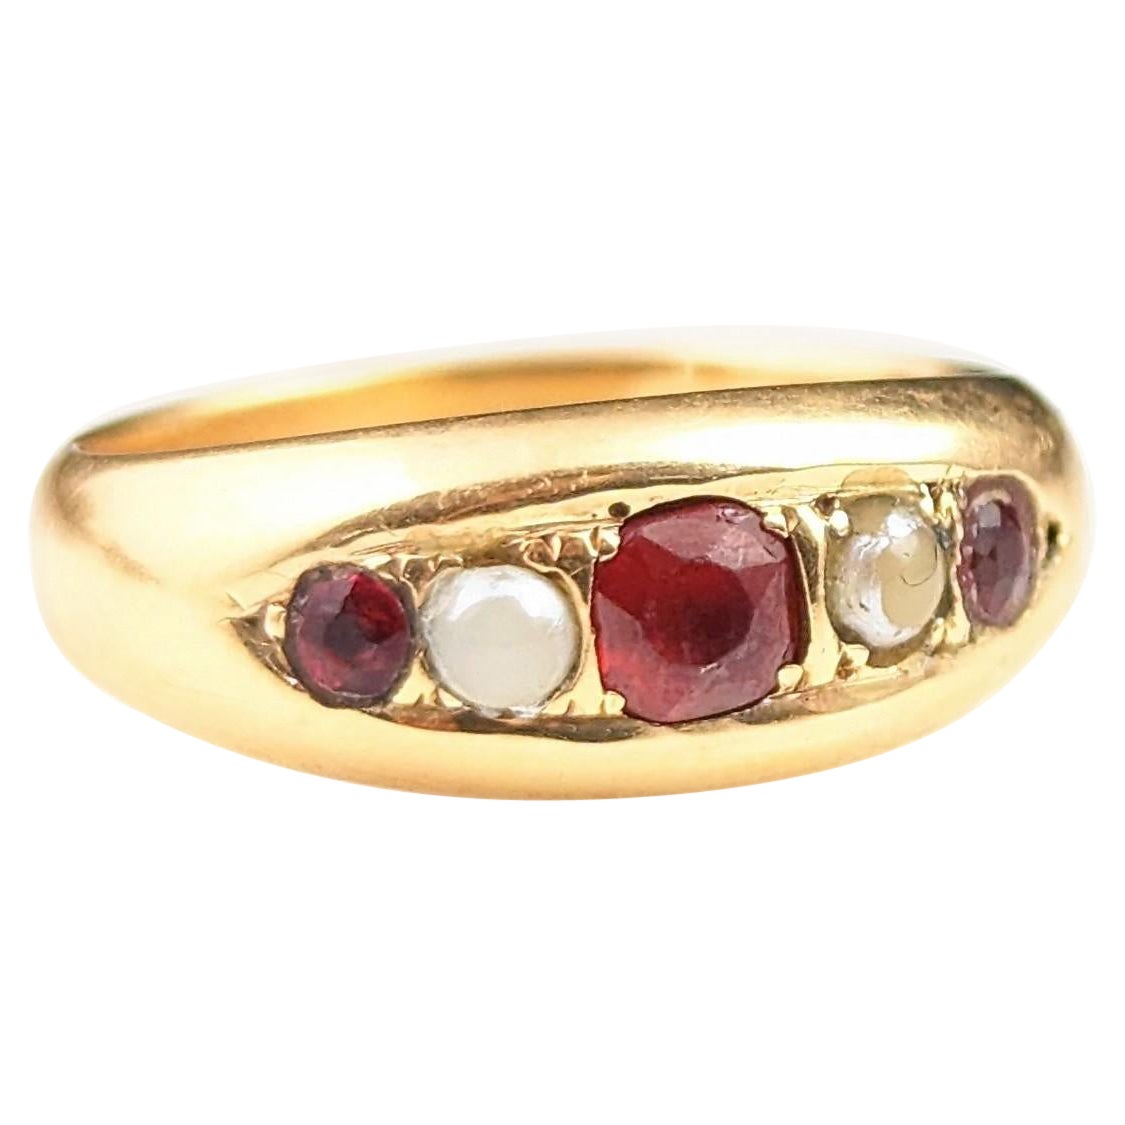 Antique 18k Gold Gypsy Set Ring, Red Paste and Pearl, Victorian